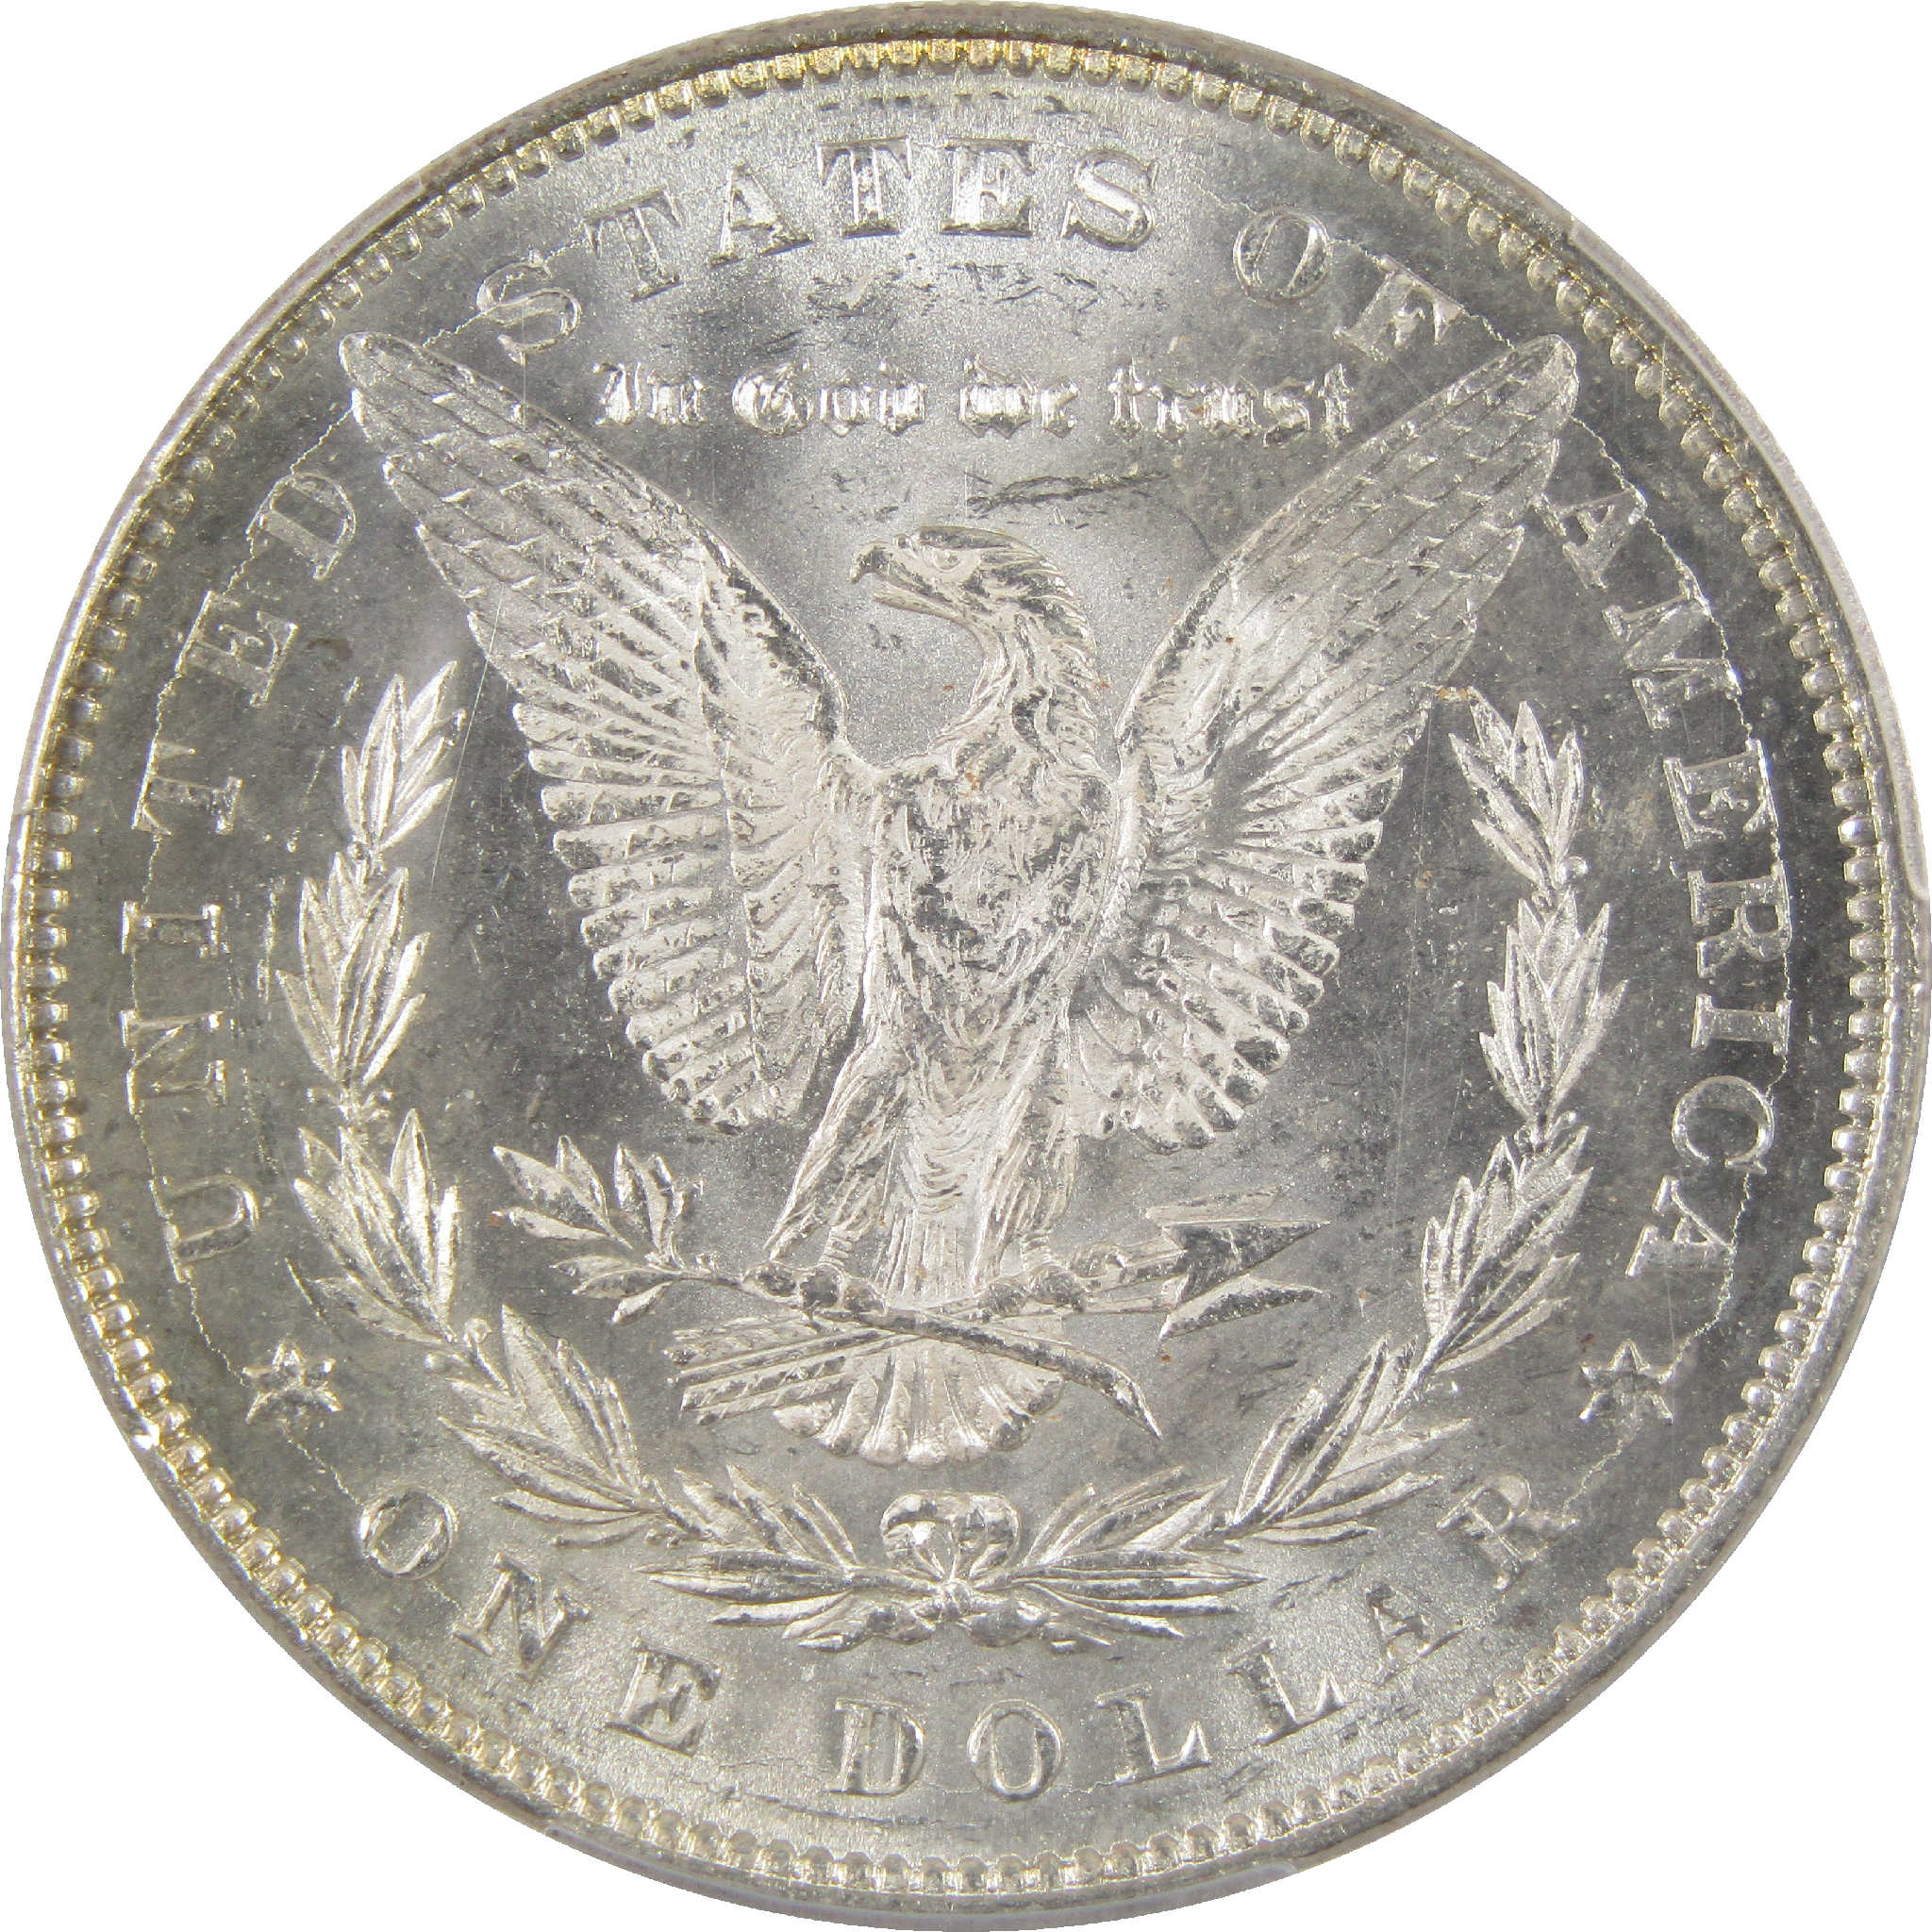 1878 7TF Rev 78 Morgan Dollar MS 62 PCGS Silver $1 Unc SKU:I11306 - Morgan coin - Morgan silver dollar - Morgan silver dollar for sale - Profile Coins &amp; Collectibles